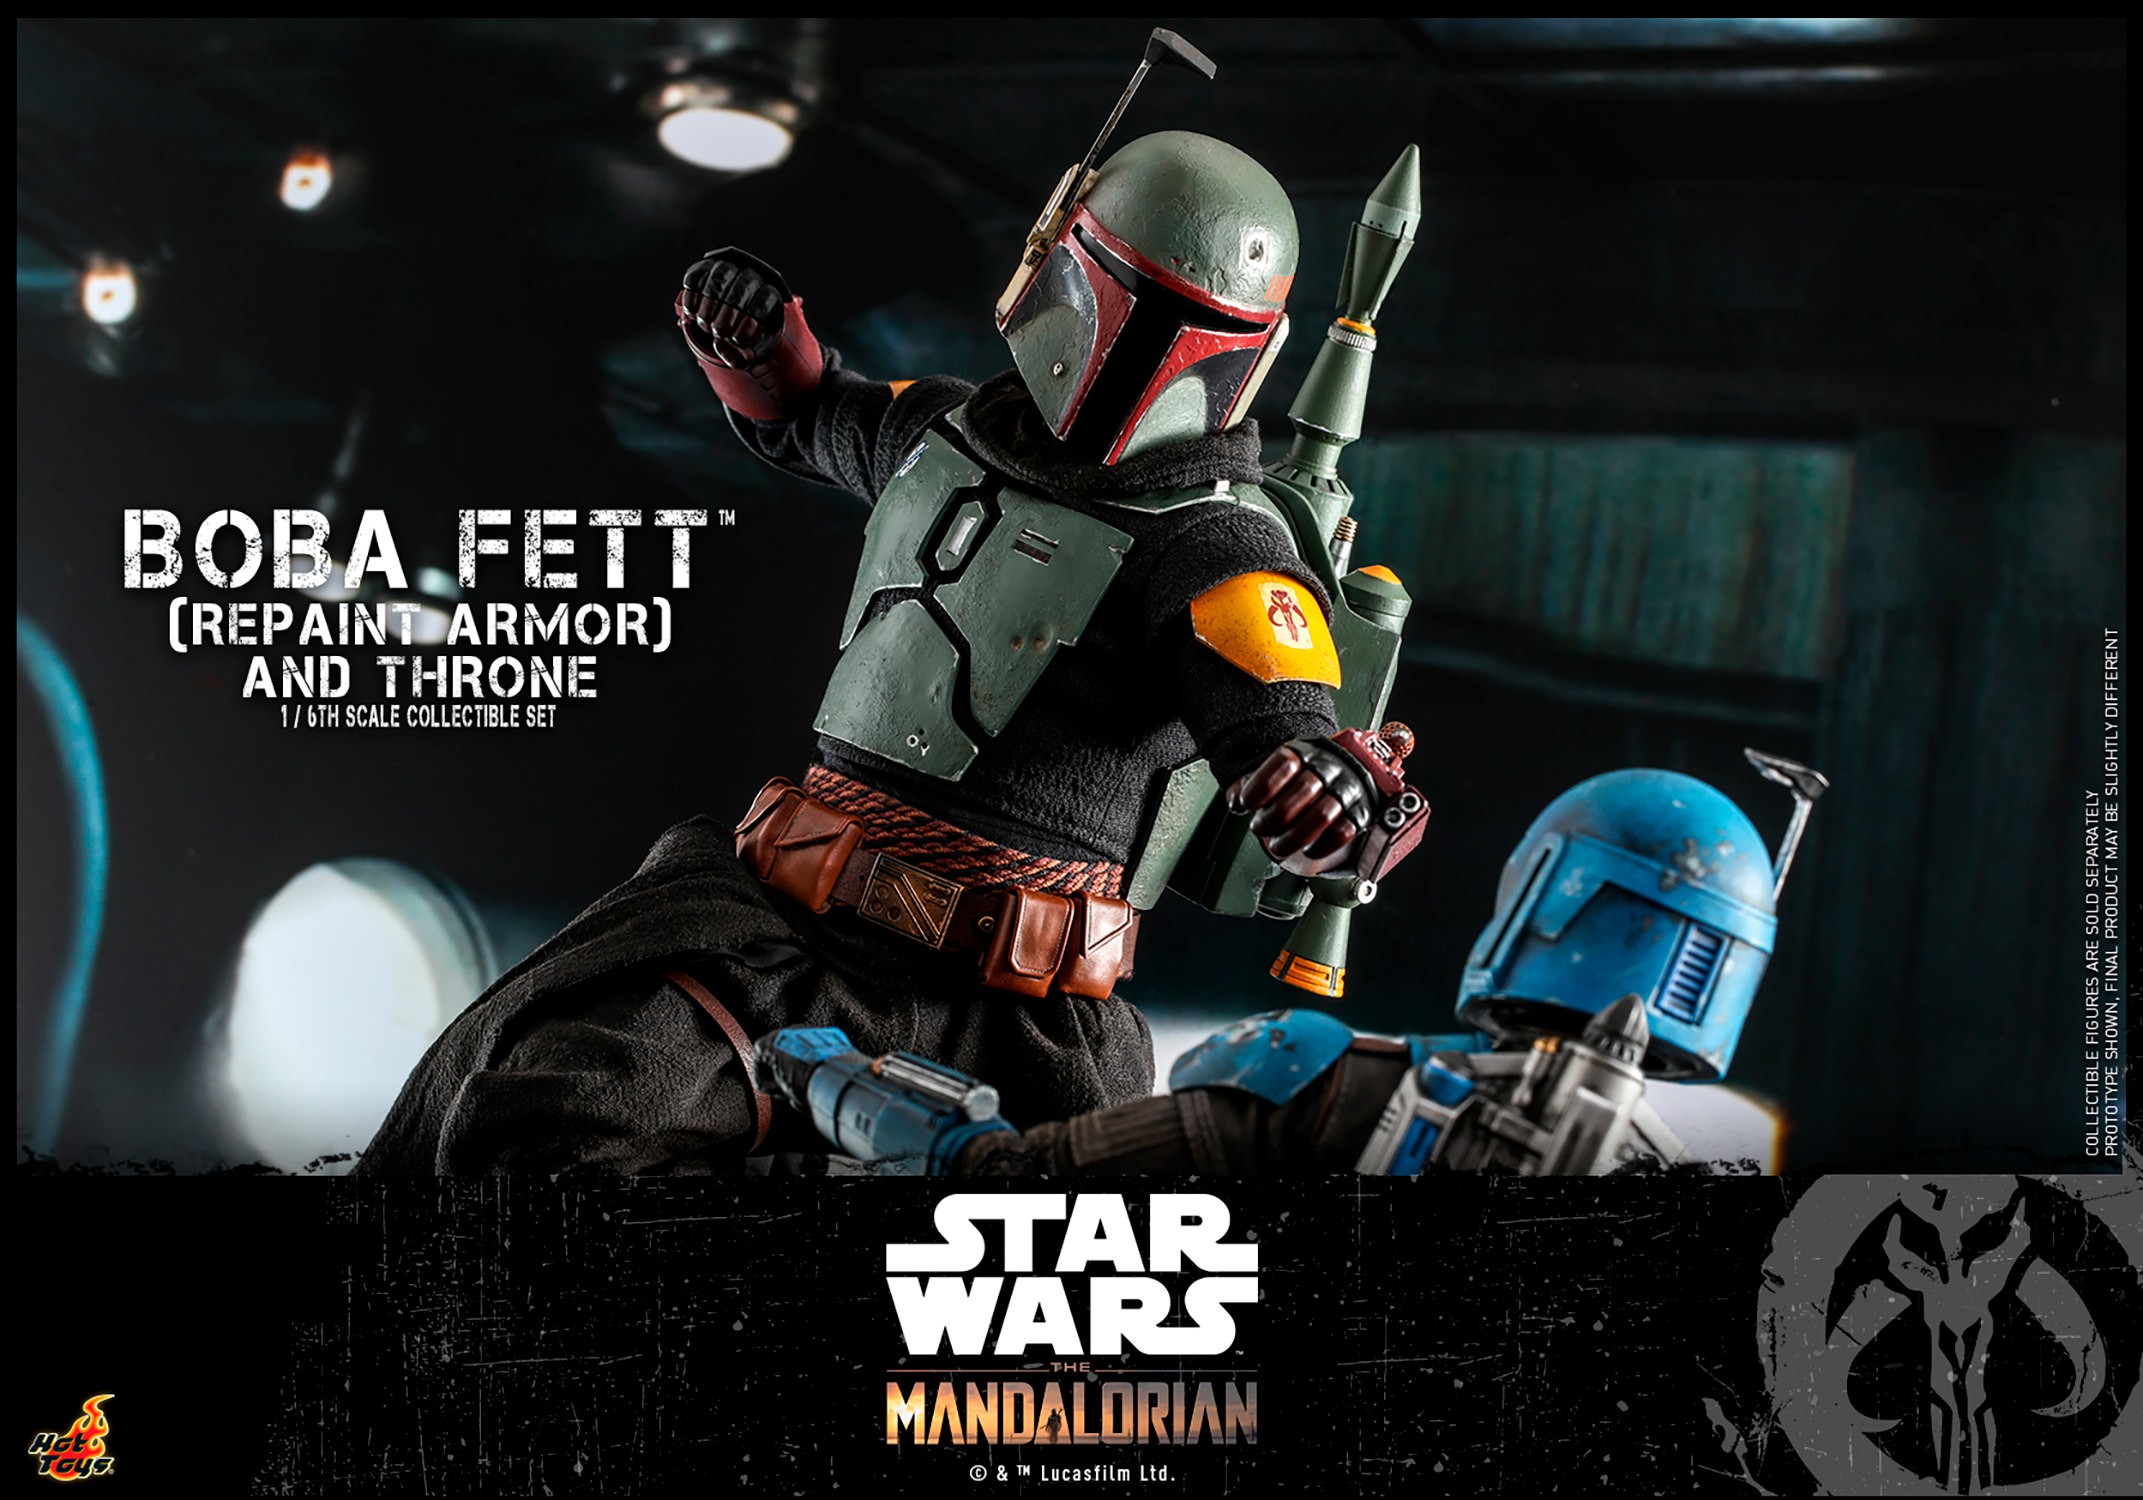 Boba Fett (Repaint Armor) and Throne Collector Edition (Prototype Shown) View 16